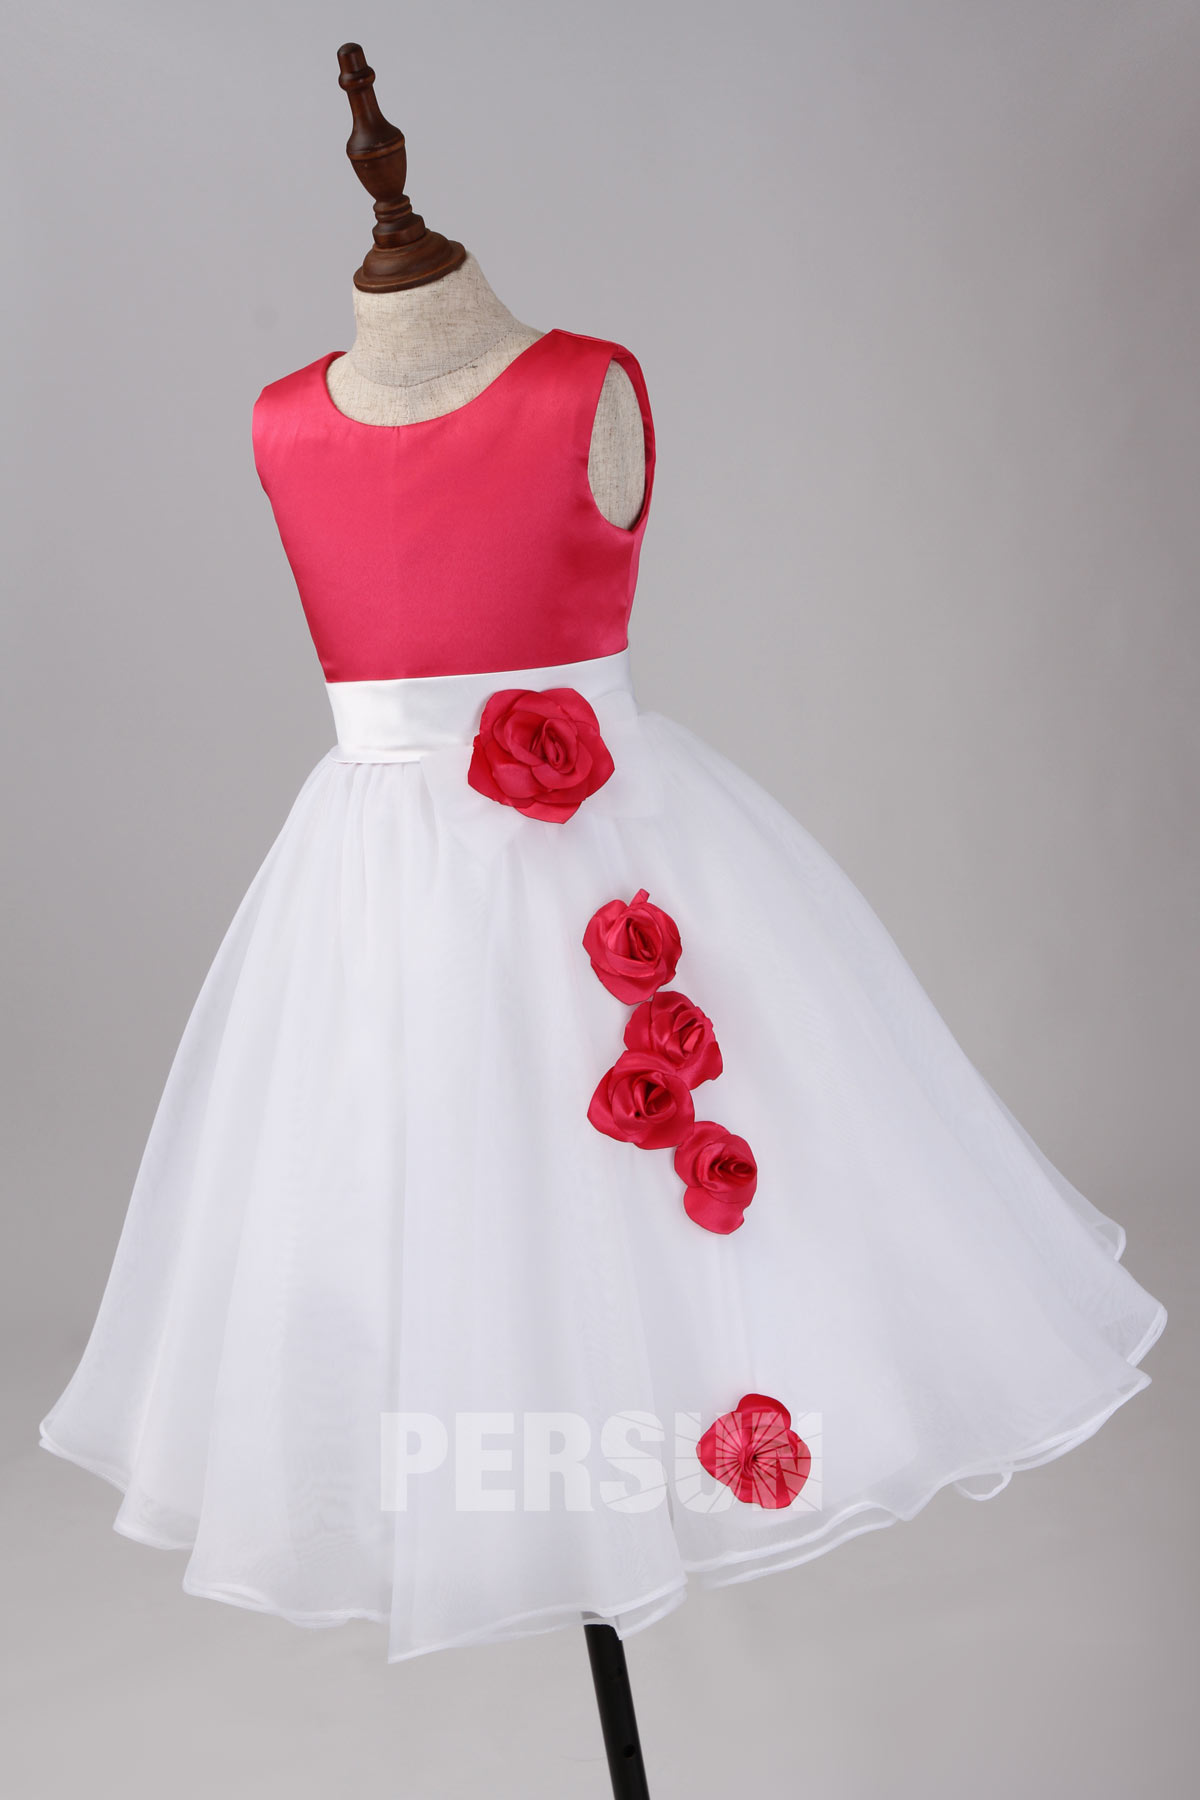 Chic Ball Gown Tea Length Flower Girl Dress in Satin and Organza